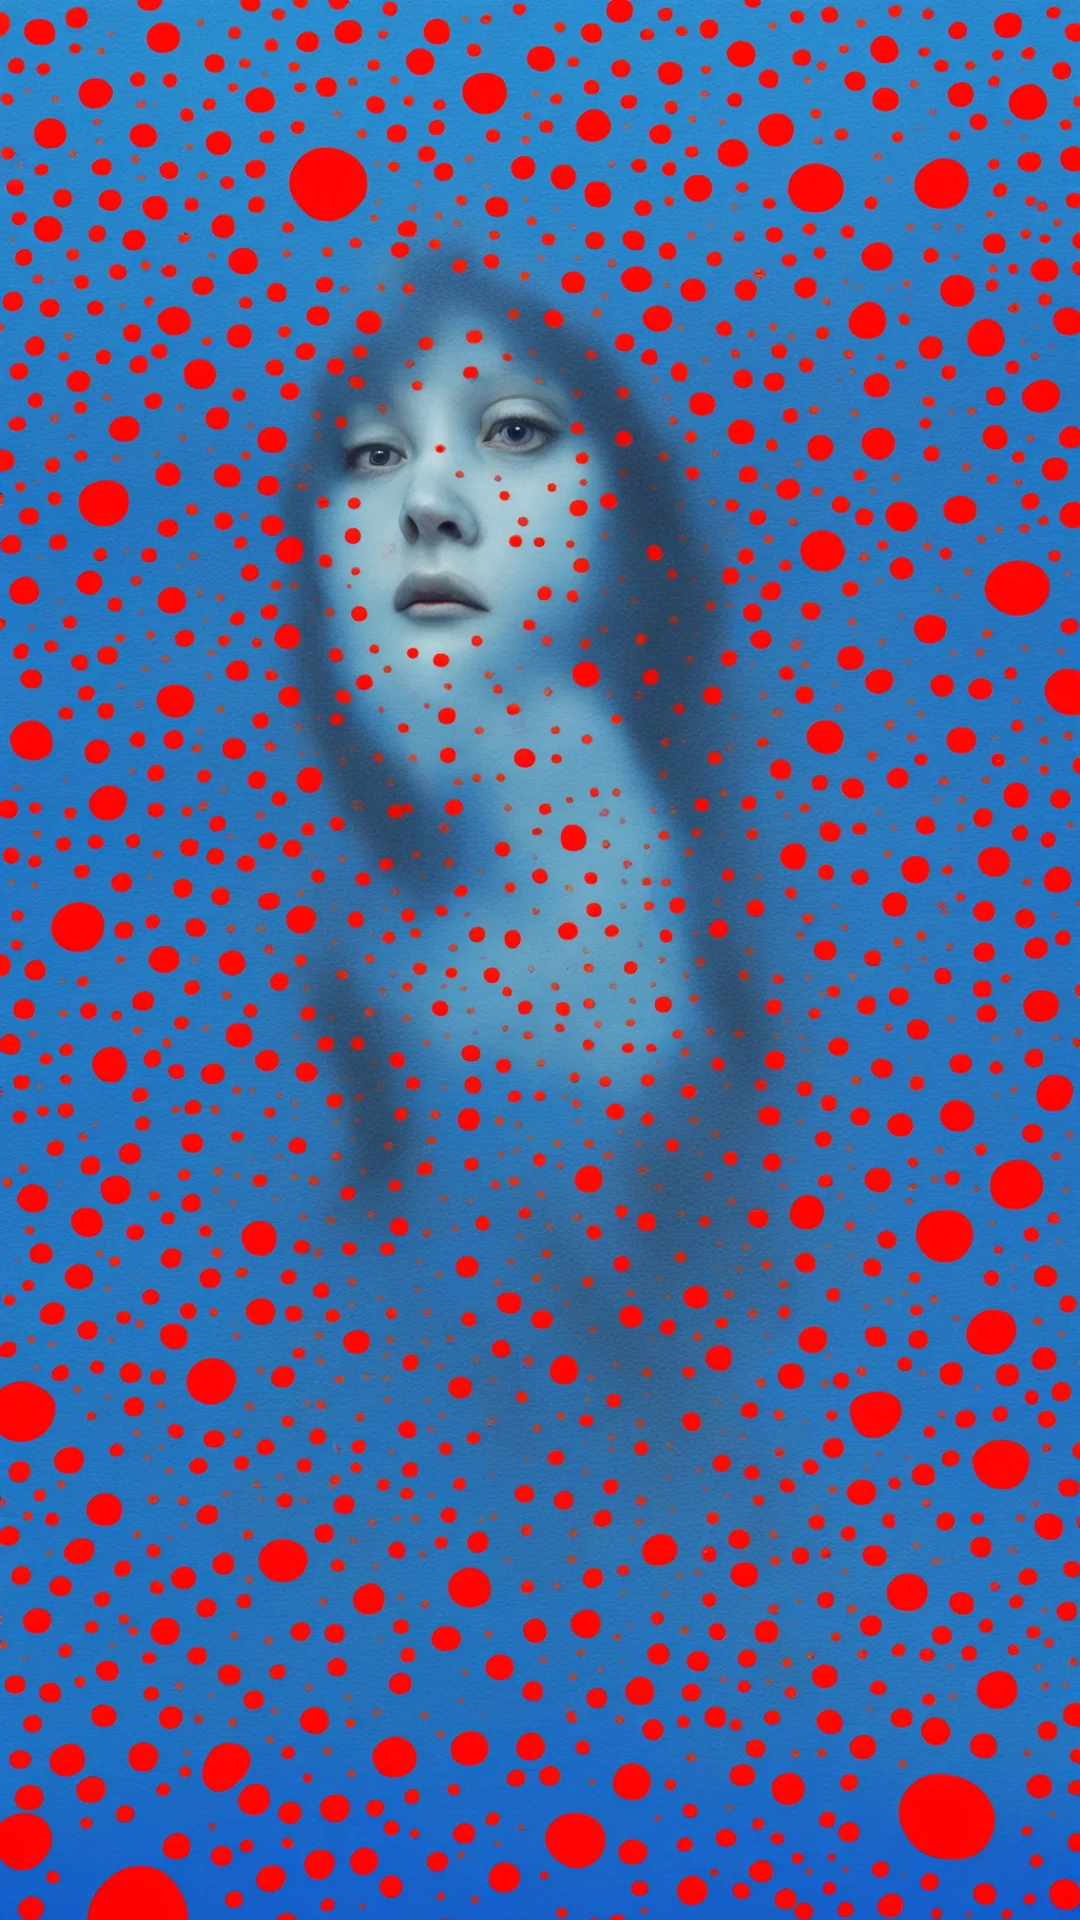 aiangst and distress in blue tones yayoi kusama style amazing awesome portrait 2 tall